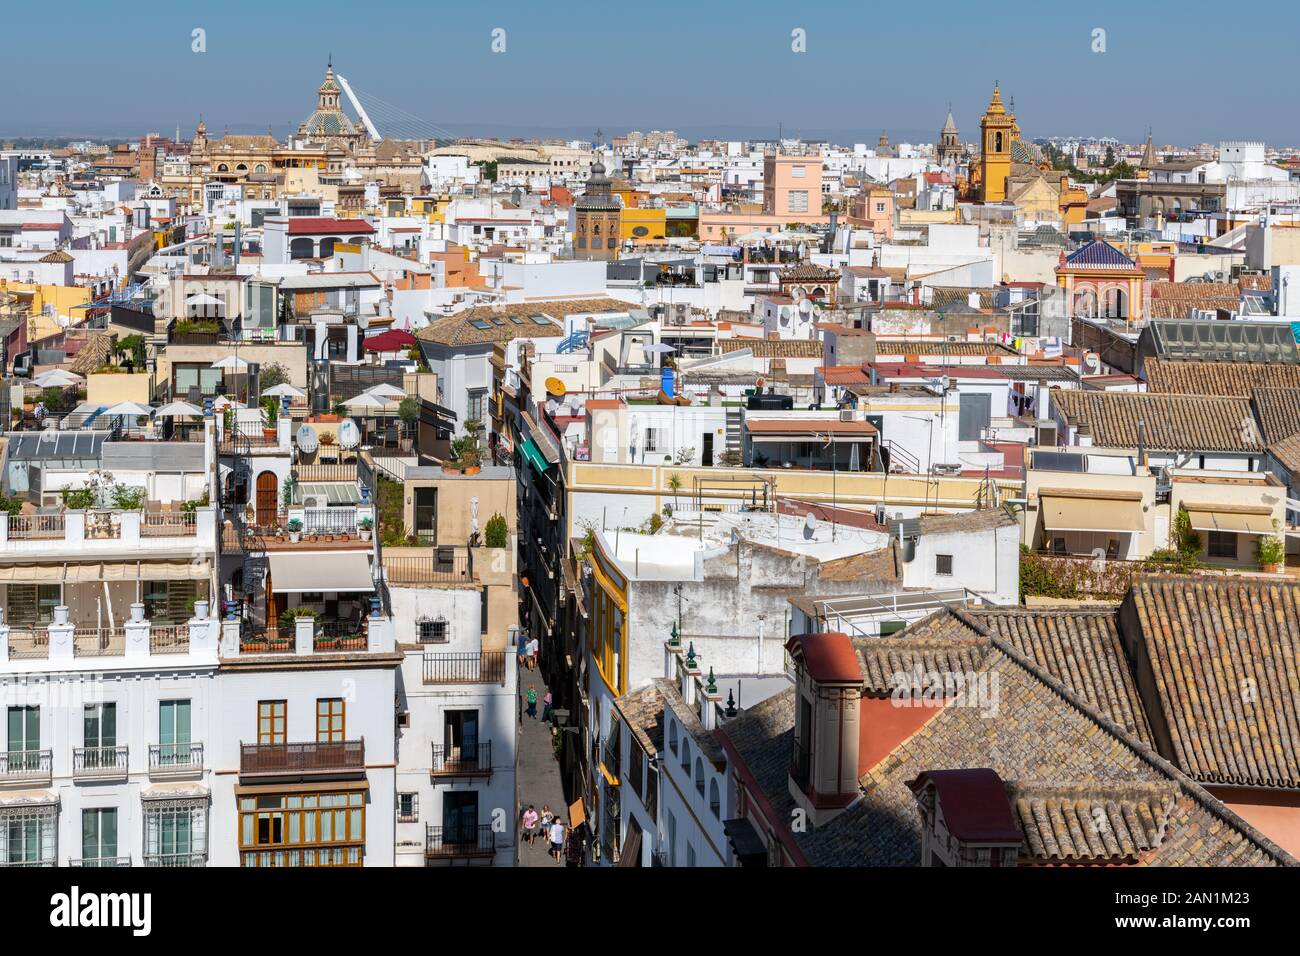 With Iglesia del Salvador & Puente del Alamillo on the horizon, Seville's colourful, narrow streets and church towers stretch out below the Giralda Stock Photo